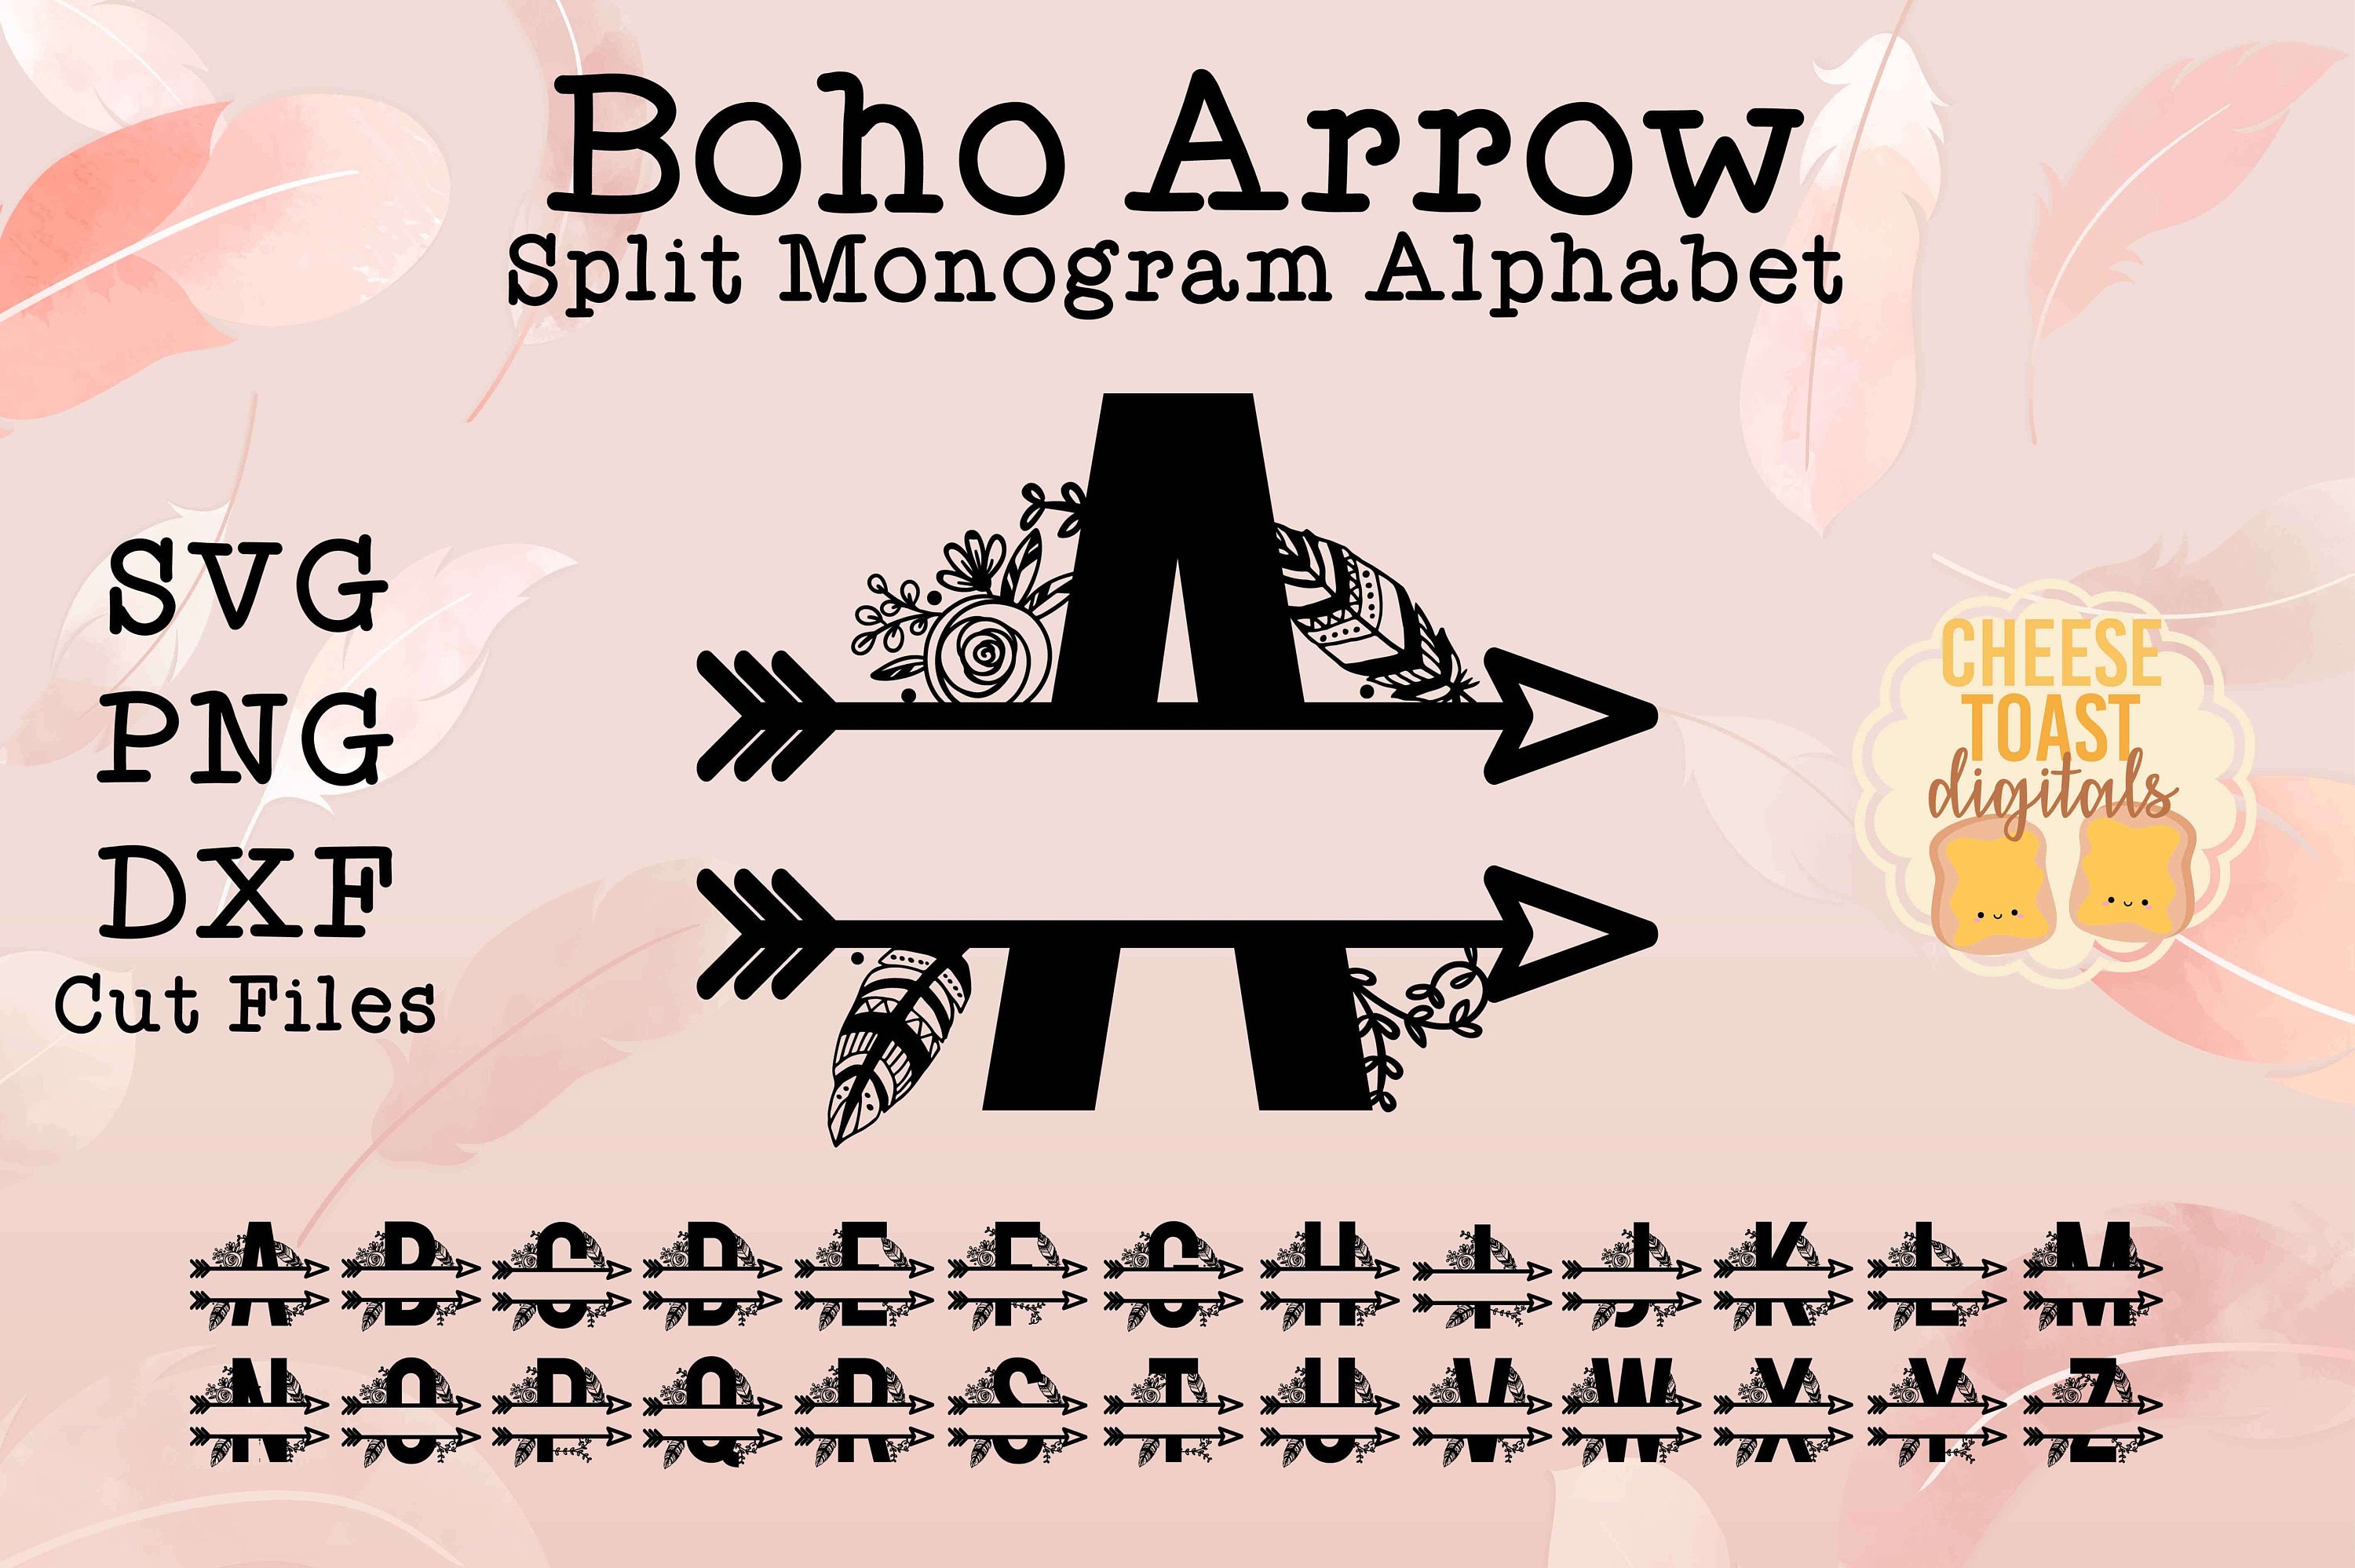 This listing is for Boho Arrow Split Monogram Letters from A-Z This listing...